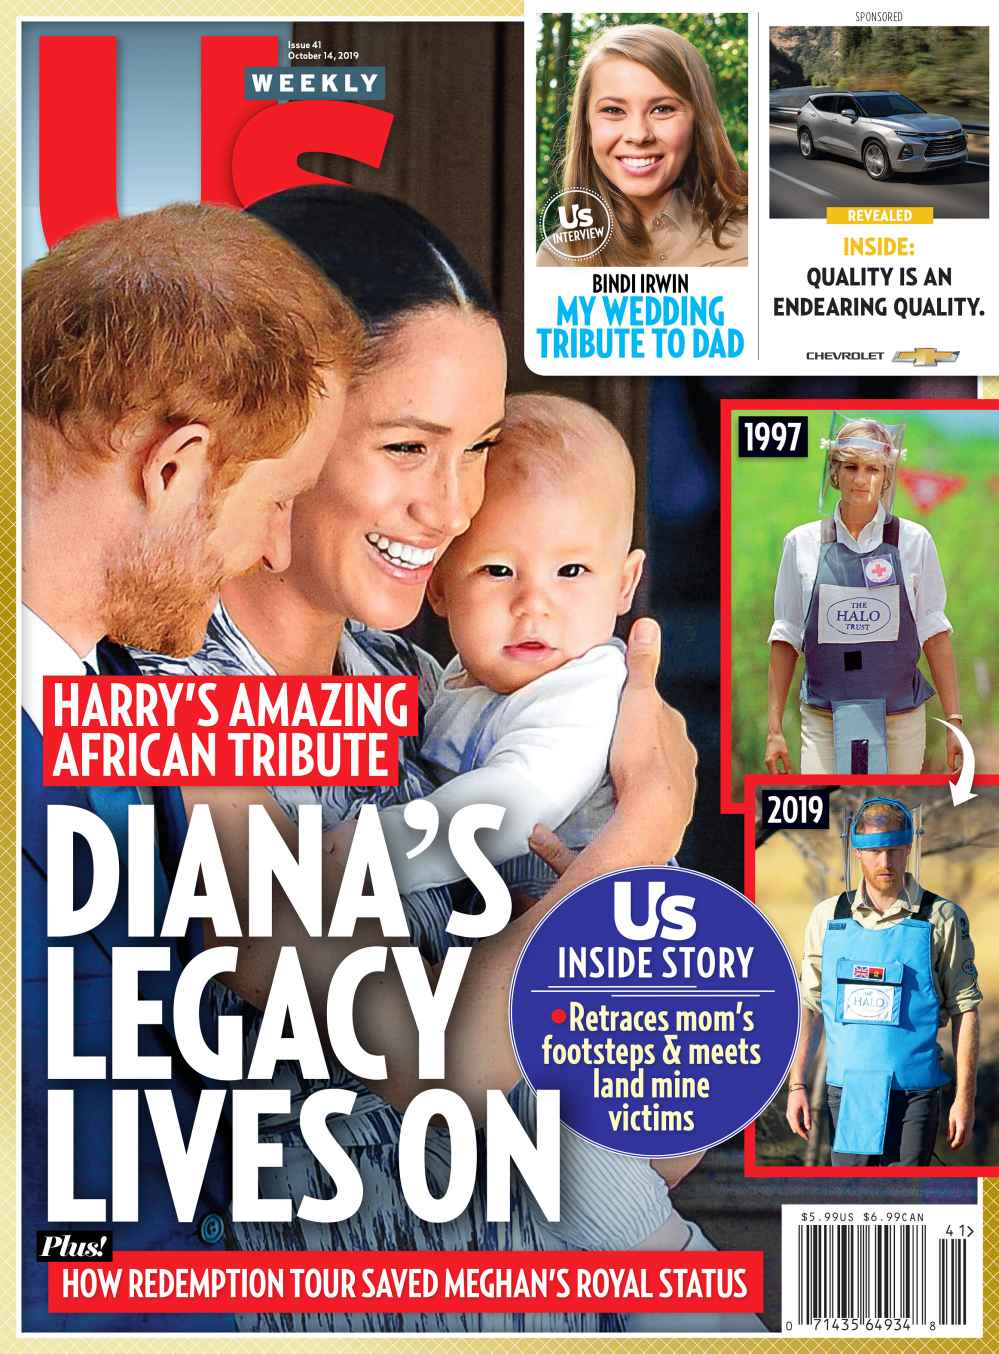 Us Weekly Cover Issue 4119 Duchess Meghan Archie Prince Harry African Tribute to Diana